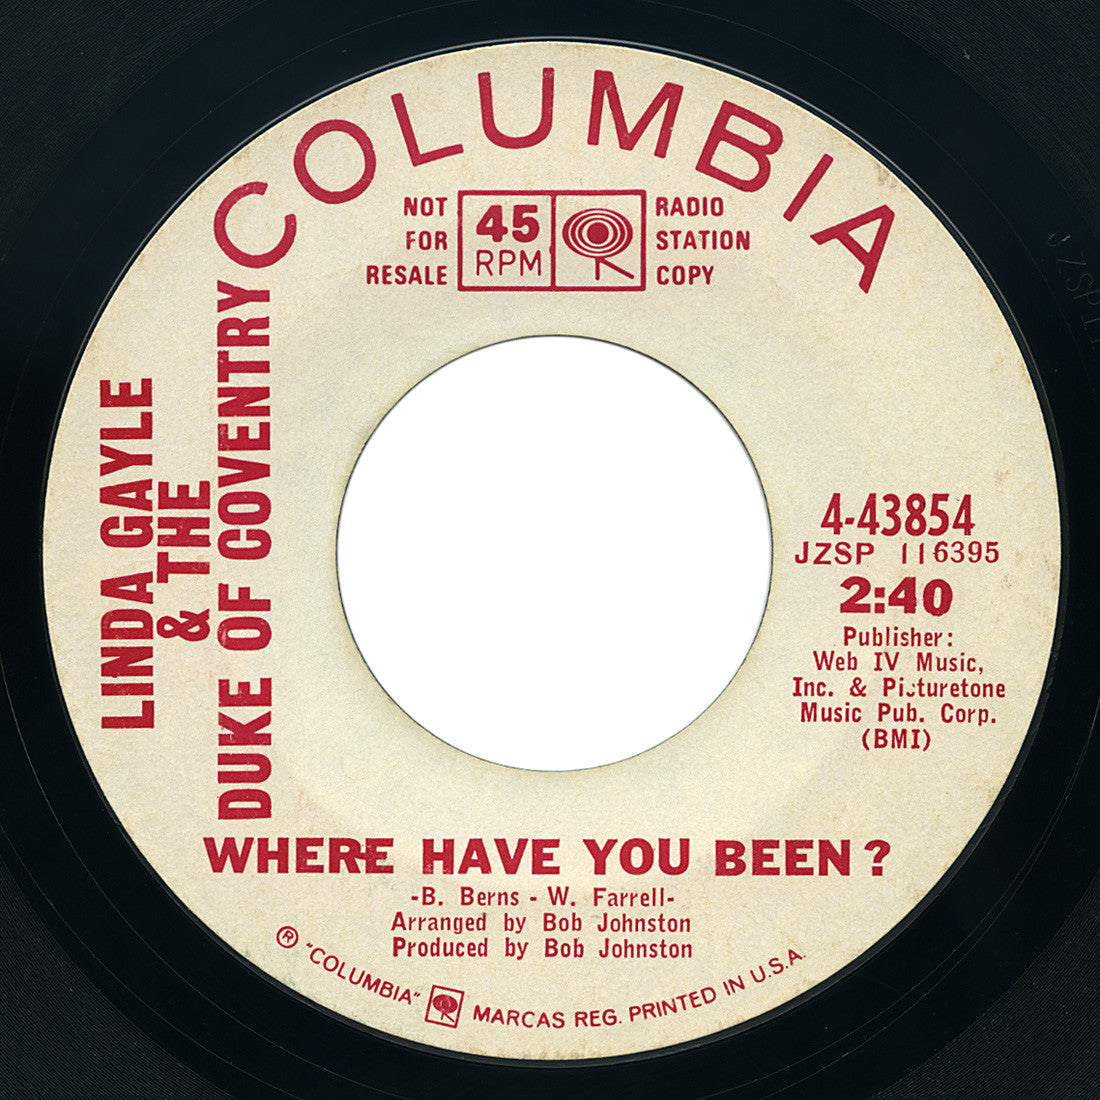 Linda Gayle & The Duke Of Coventry – Where Have You Been? / Twist And Shout  – Columbia